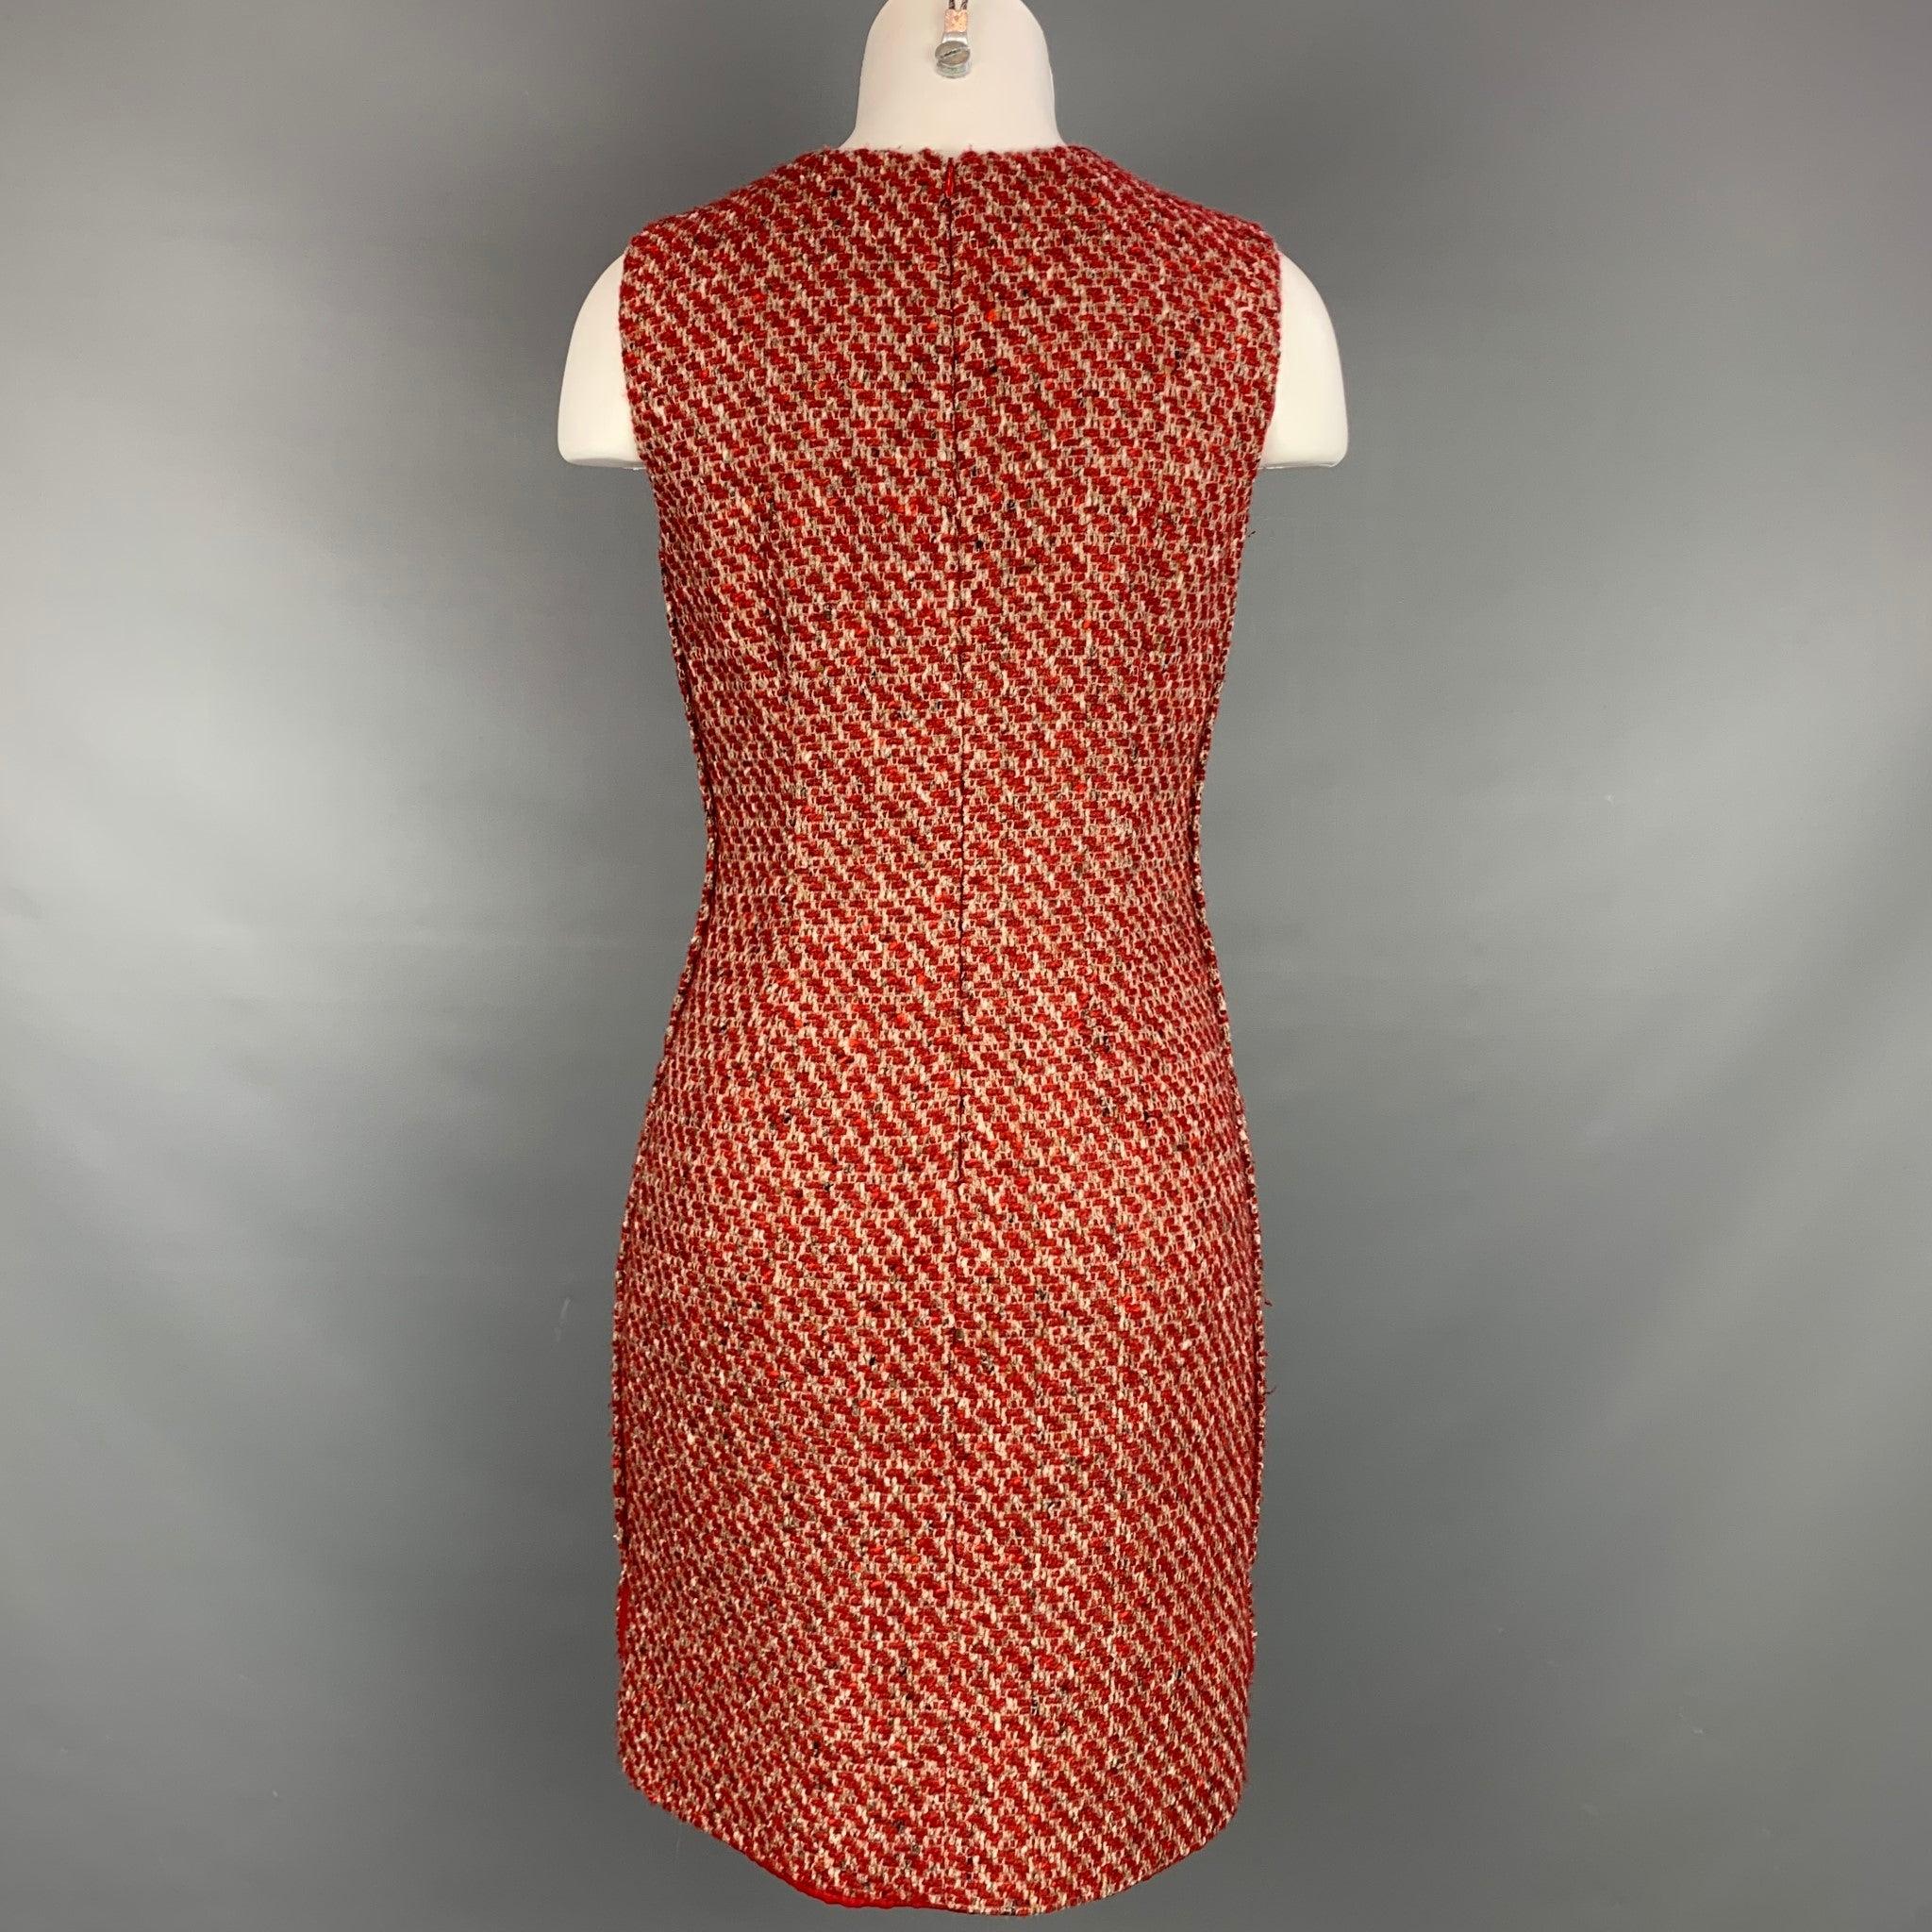 LORO PIANA Size 6 Red & Taupe Textured Boucle Cashmere Blend Shift Dress In Good Condition For Sale In San Francisco, CA